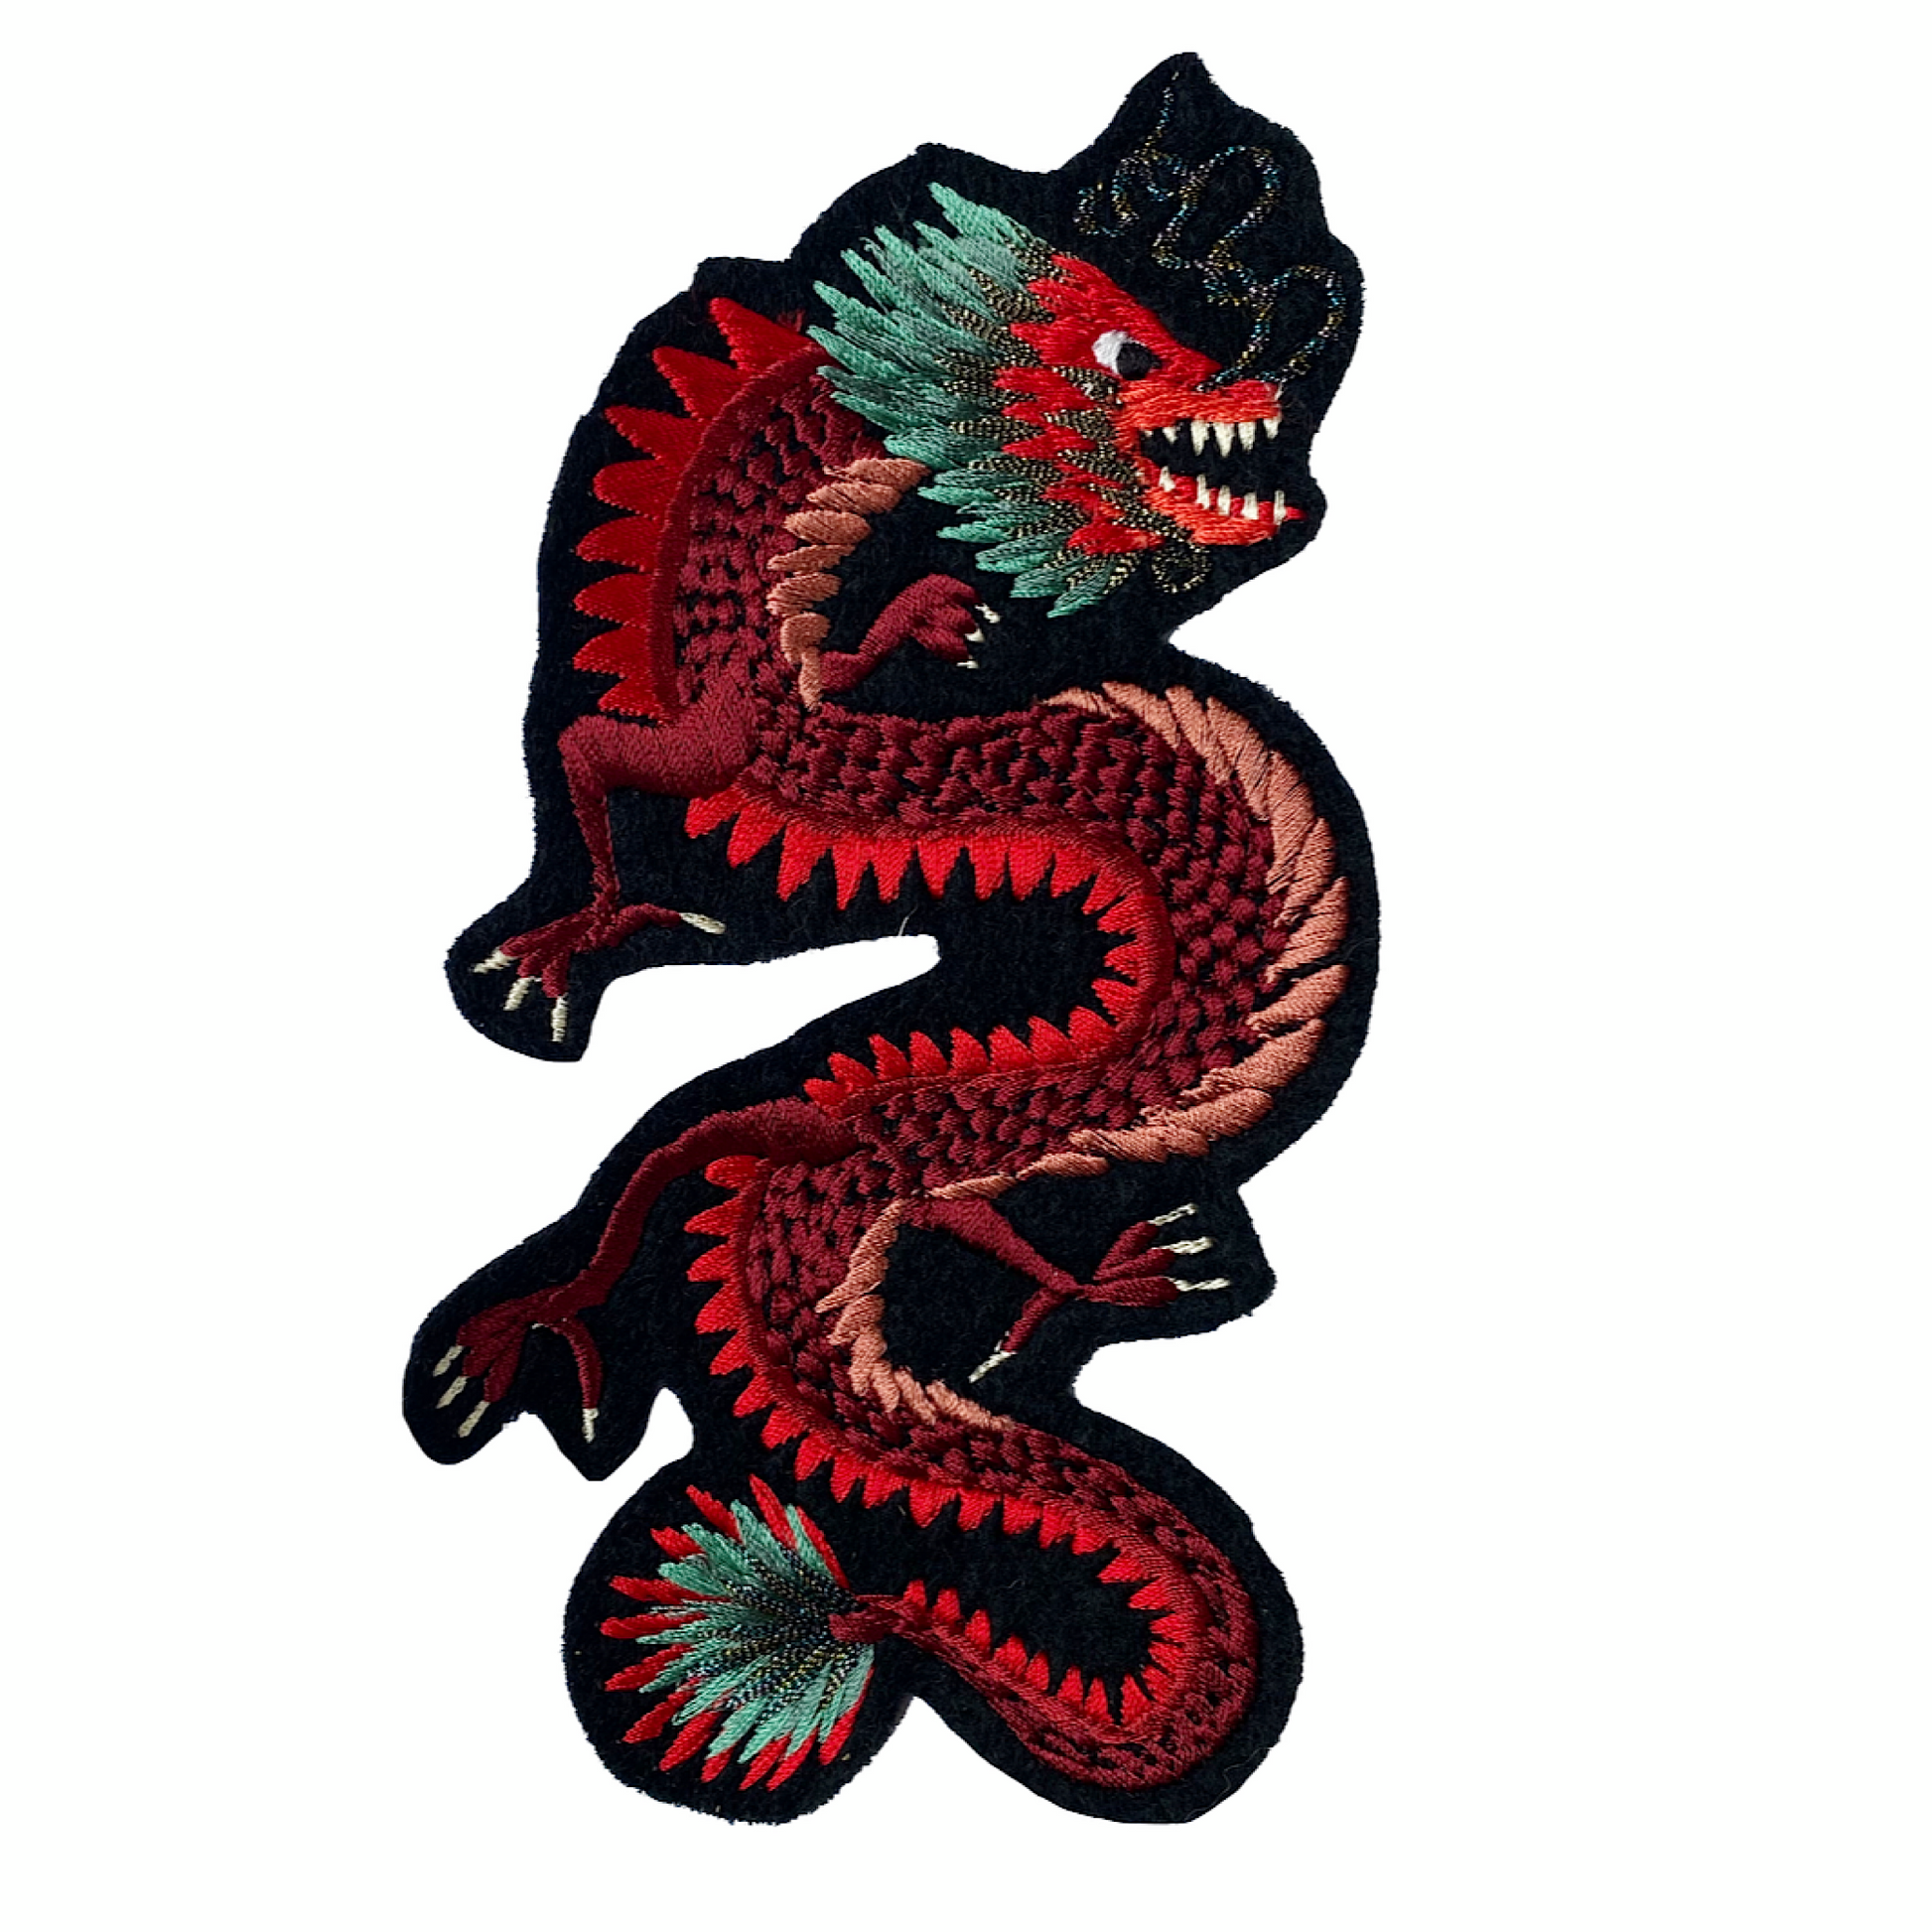 Dragon embroidered patch on white background